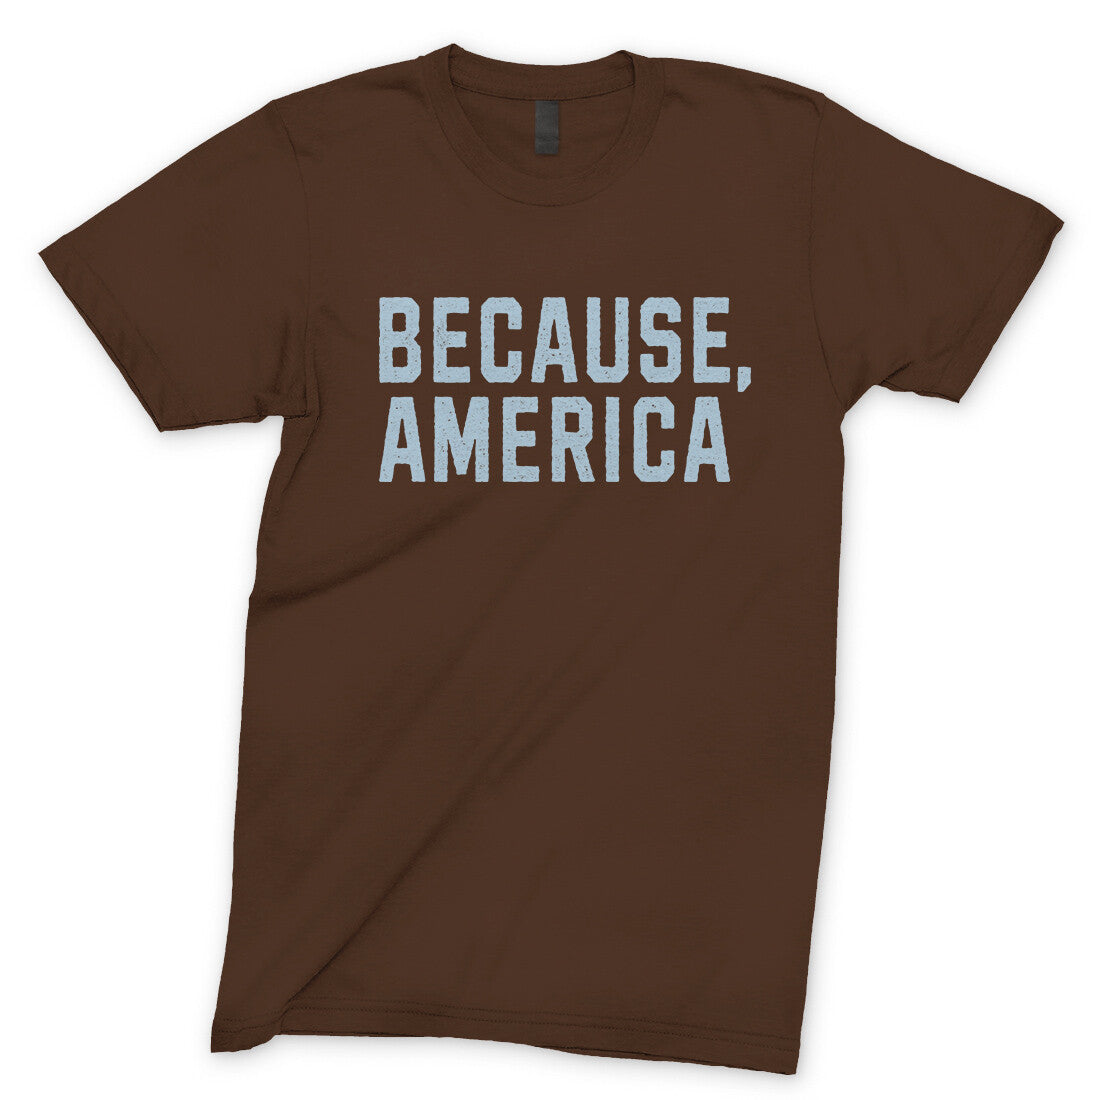 Because America in Dark Chocolate Color